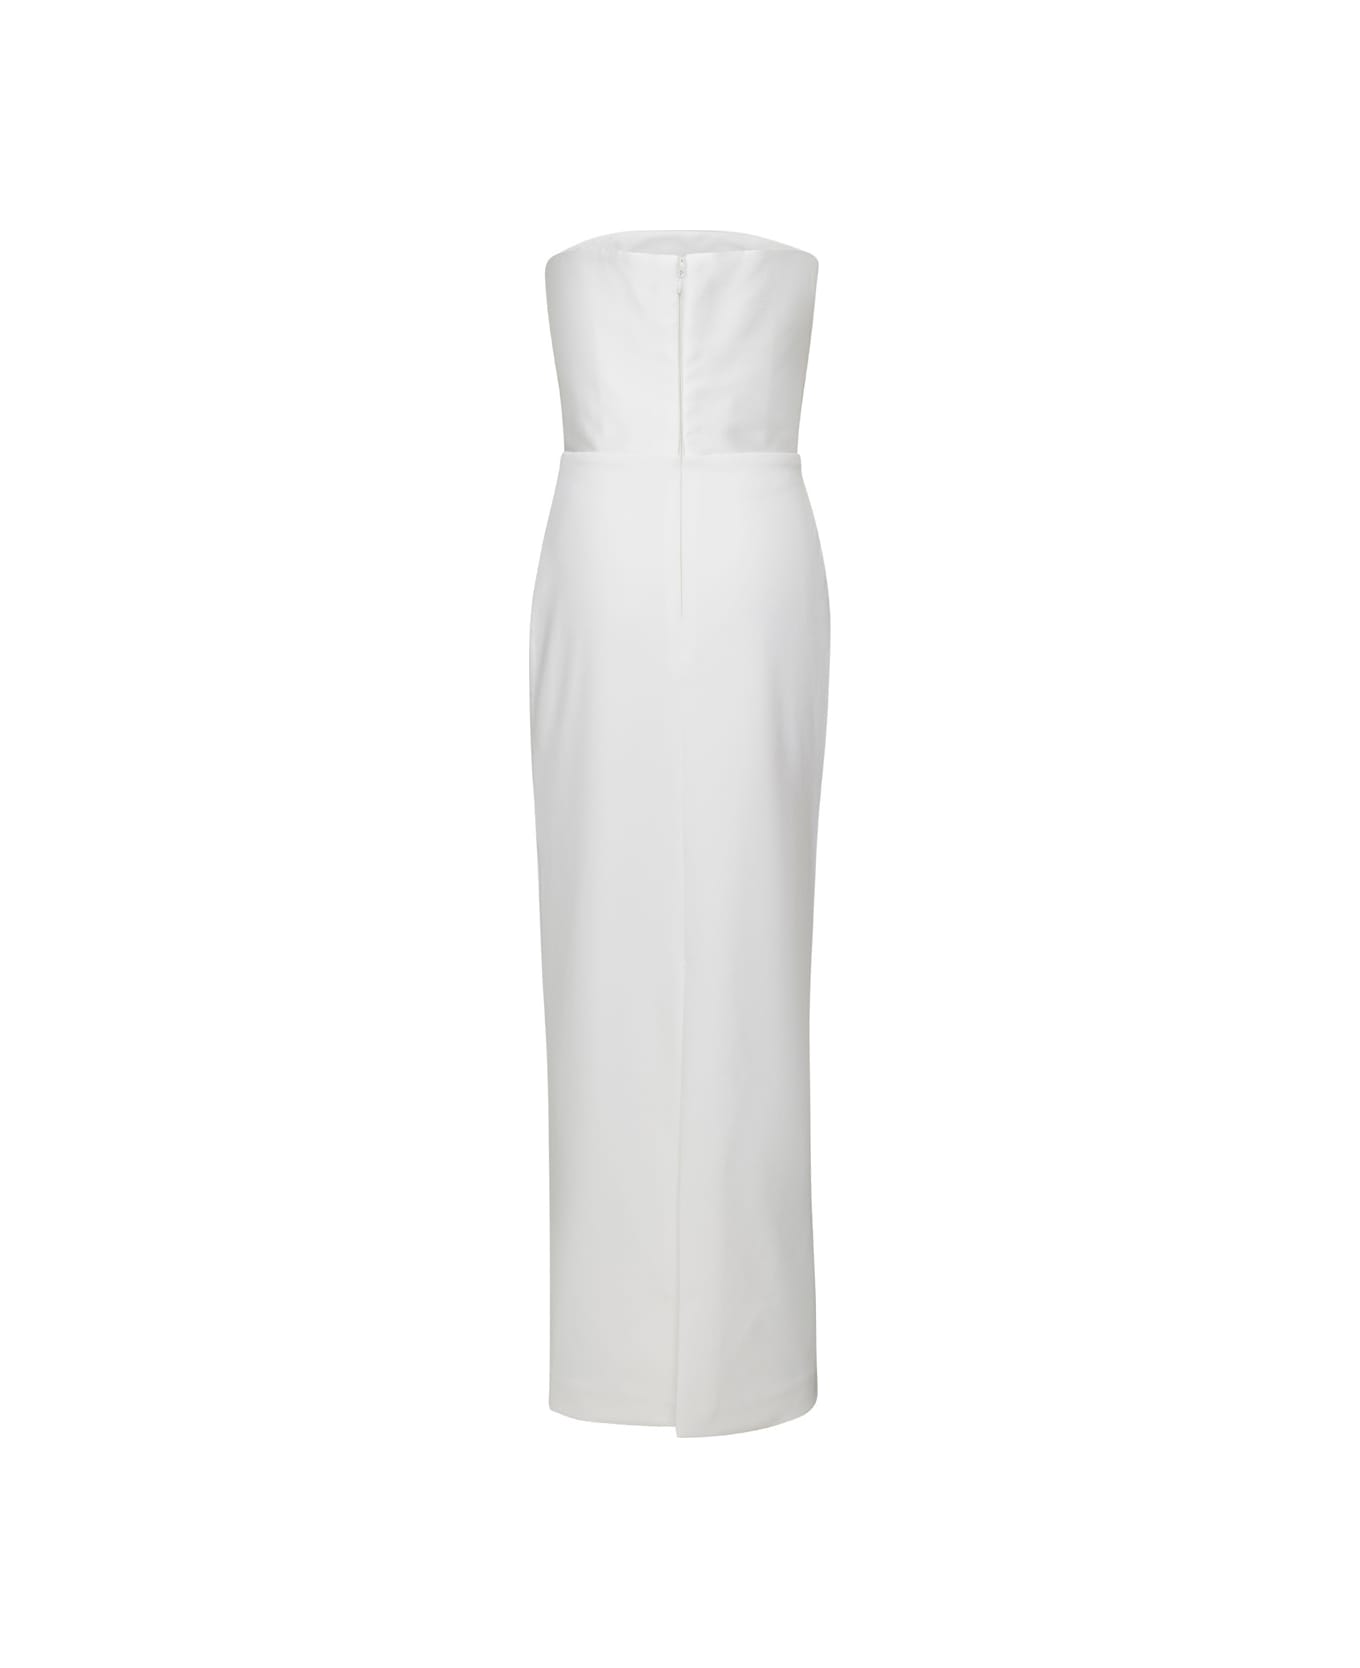 Solace London Afra Maxi Dress In Cream Twill & Crepe Knit - White